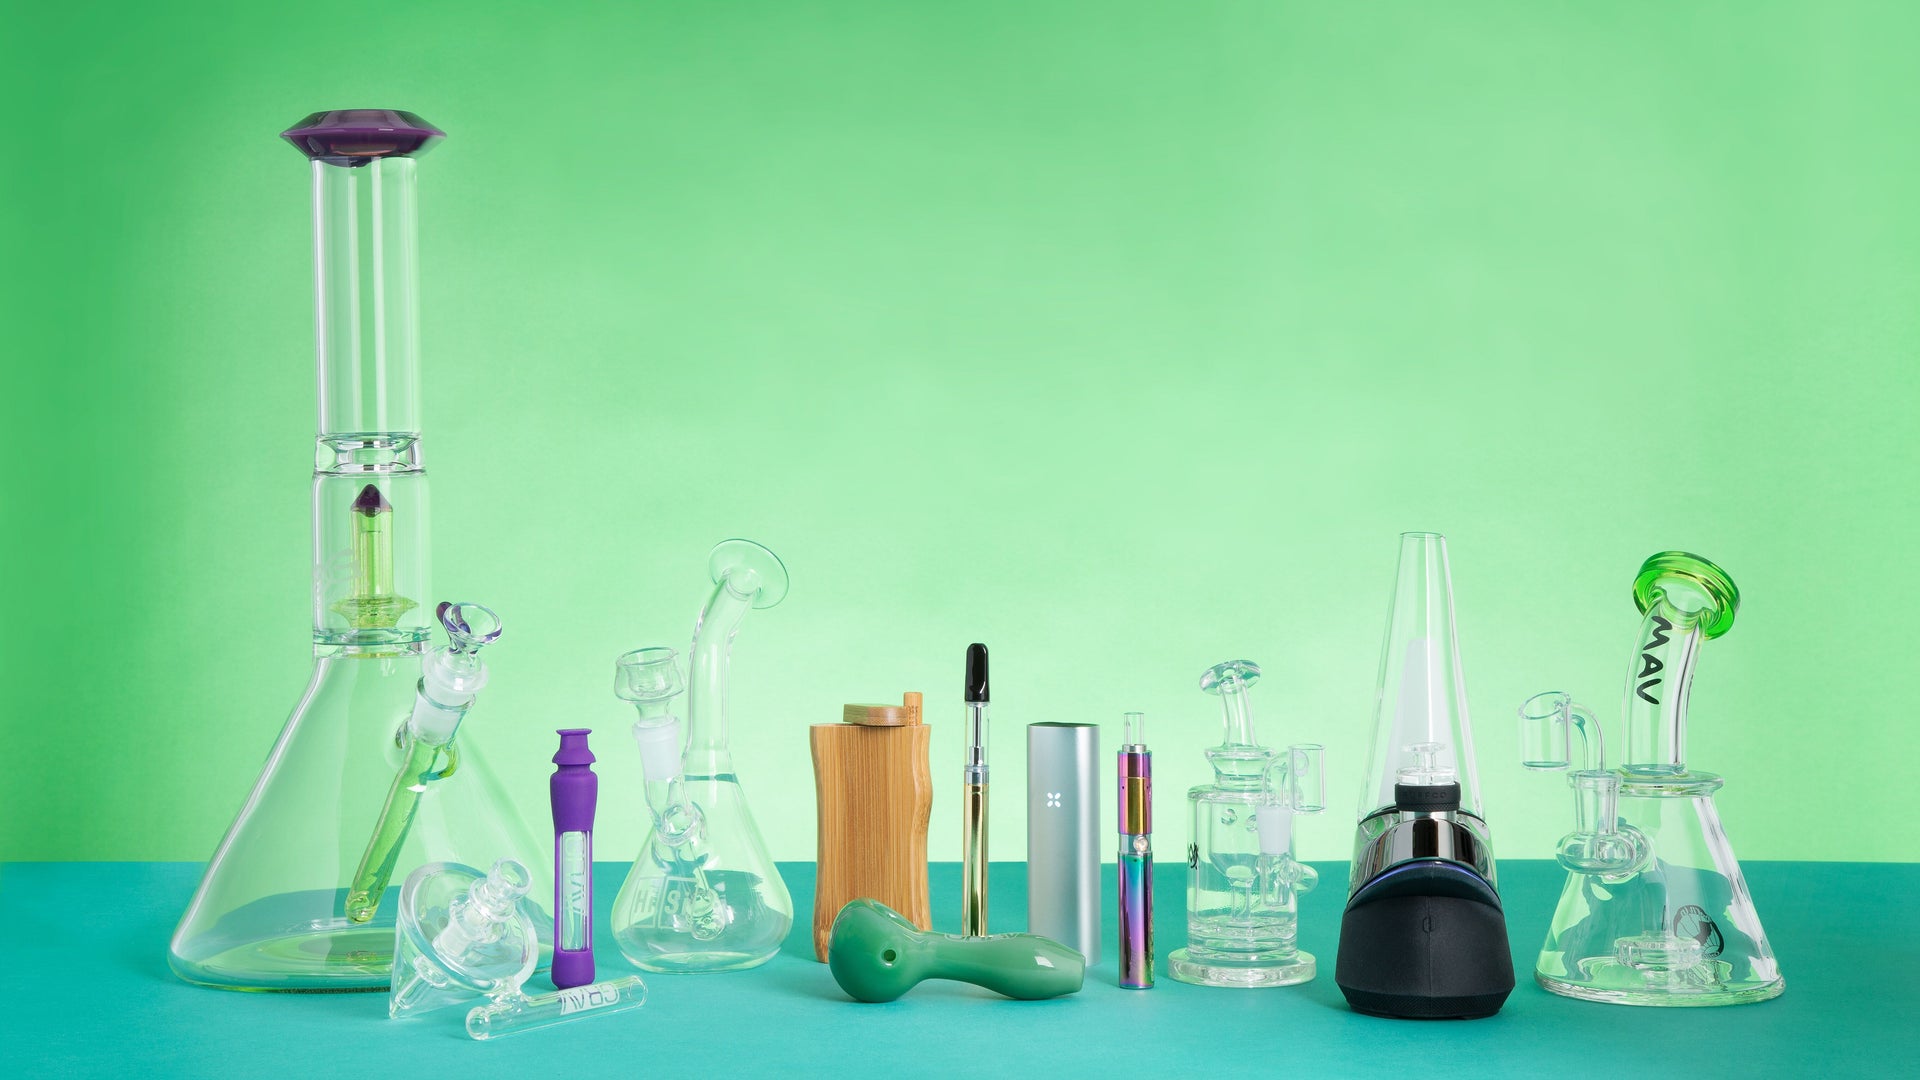 Best Weed Accessories for Smoking: Bongs and Pipes for Every Budget